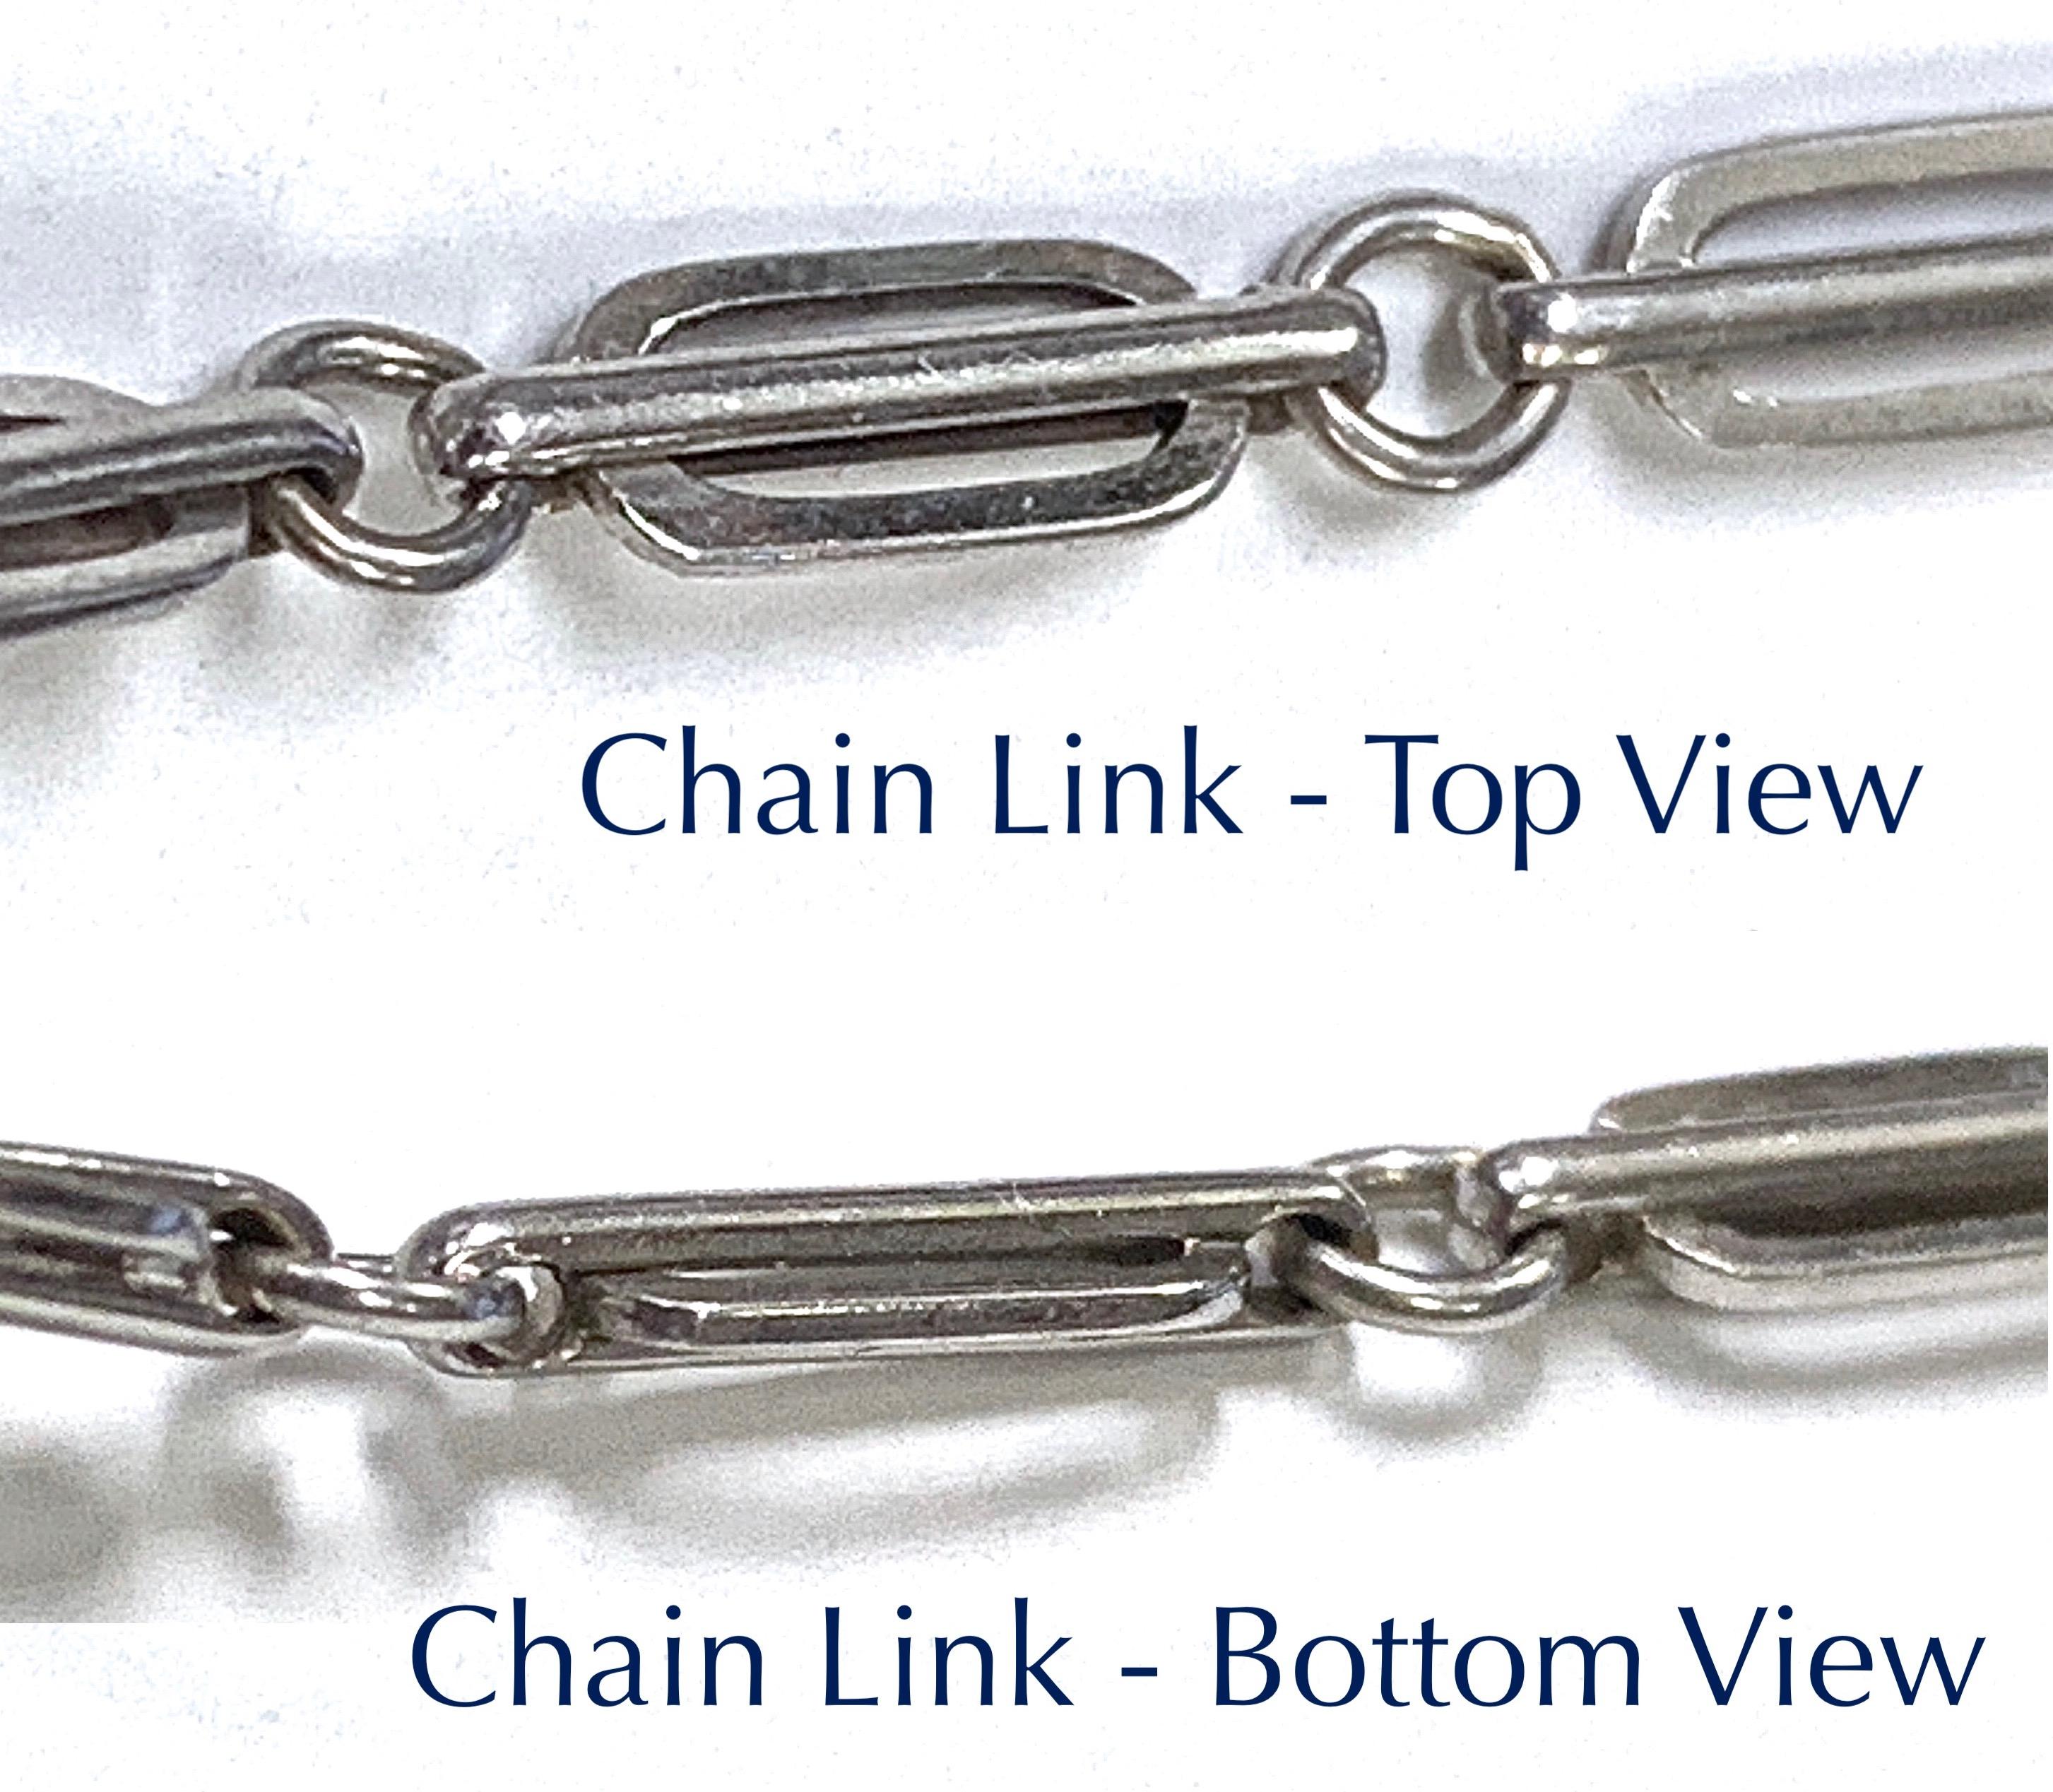 Brilliant Cut White Gold Bracelet with Deco-Era Watch Chain Links and Diamond Ball Clasp